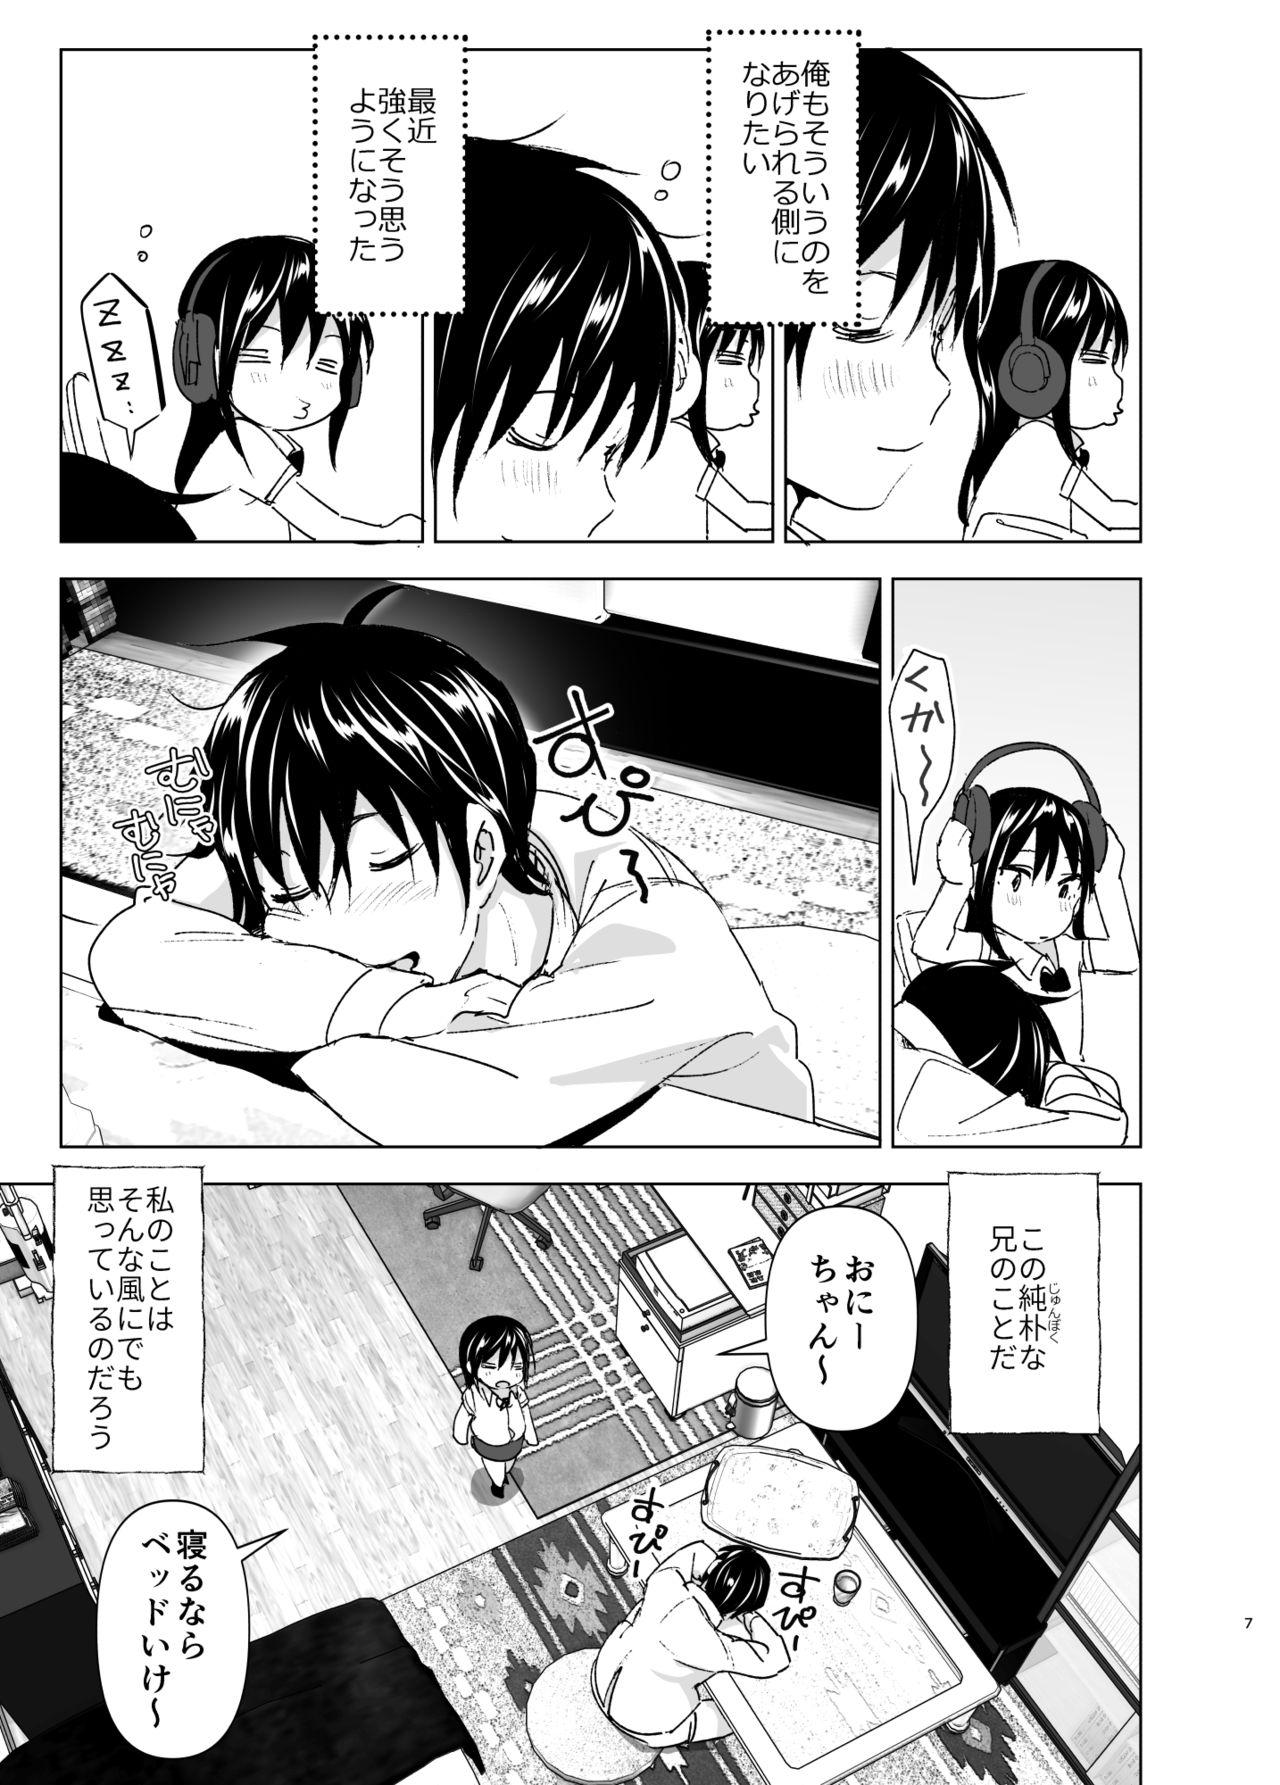 Spy Camera Onii-chan to Issho! - Original Natural - Page 6